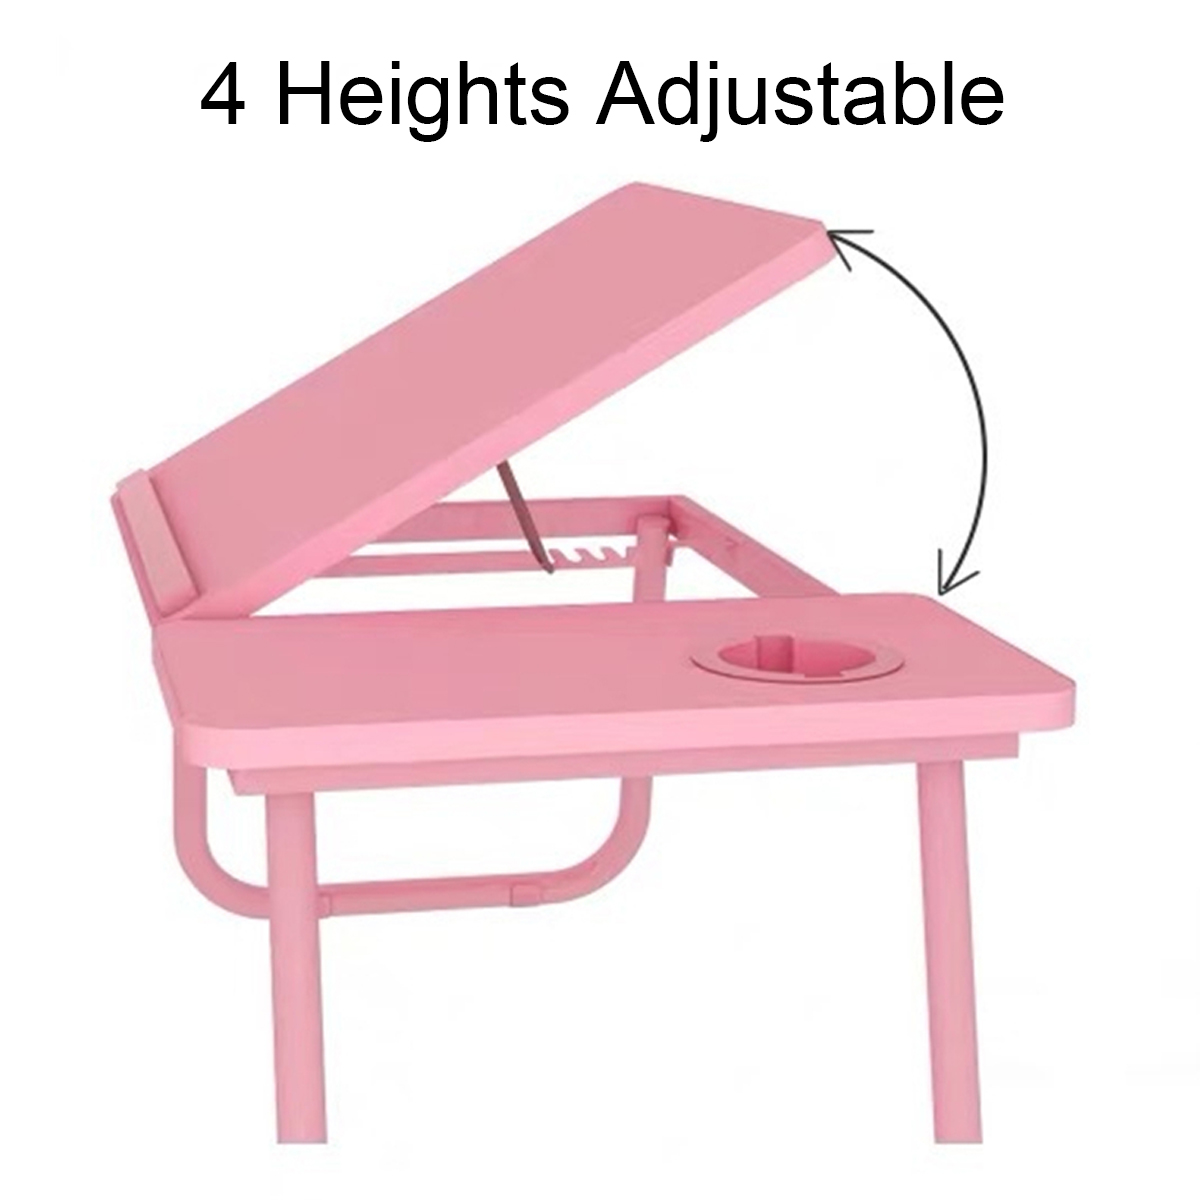 Liftable-Folding-Computer-Desk-Laptop-Stand-4-Heights-Adjustable-with-Cup-Holder-Lap-Bed-Table-Tray--1783876-2